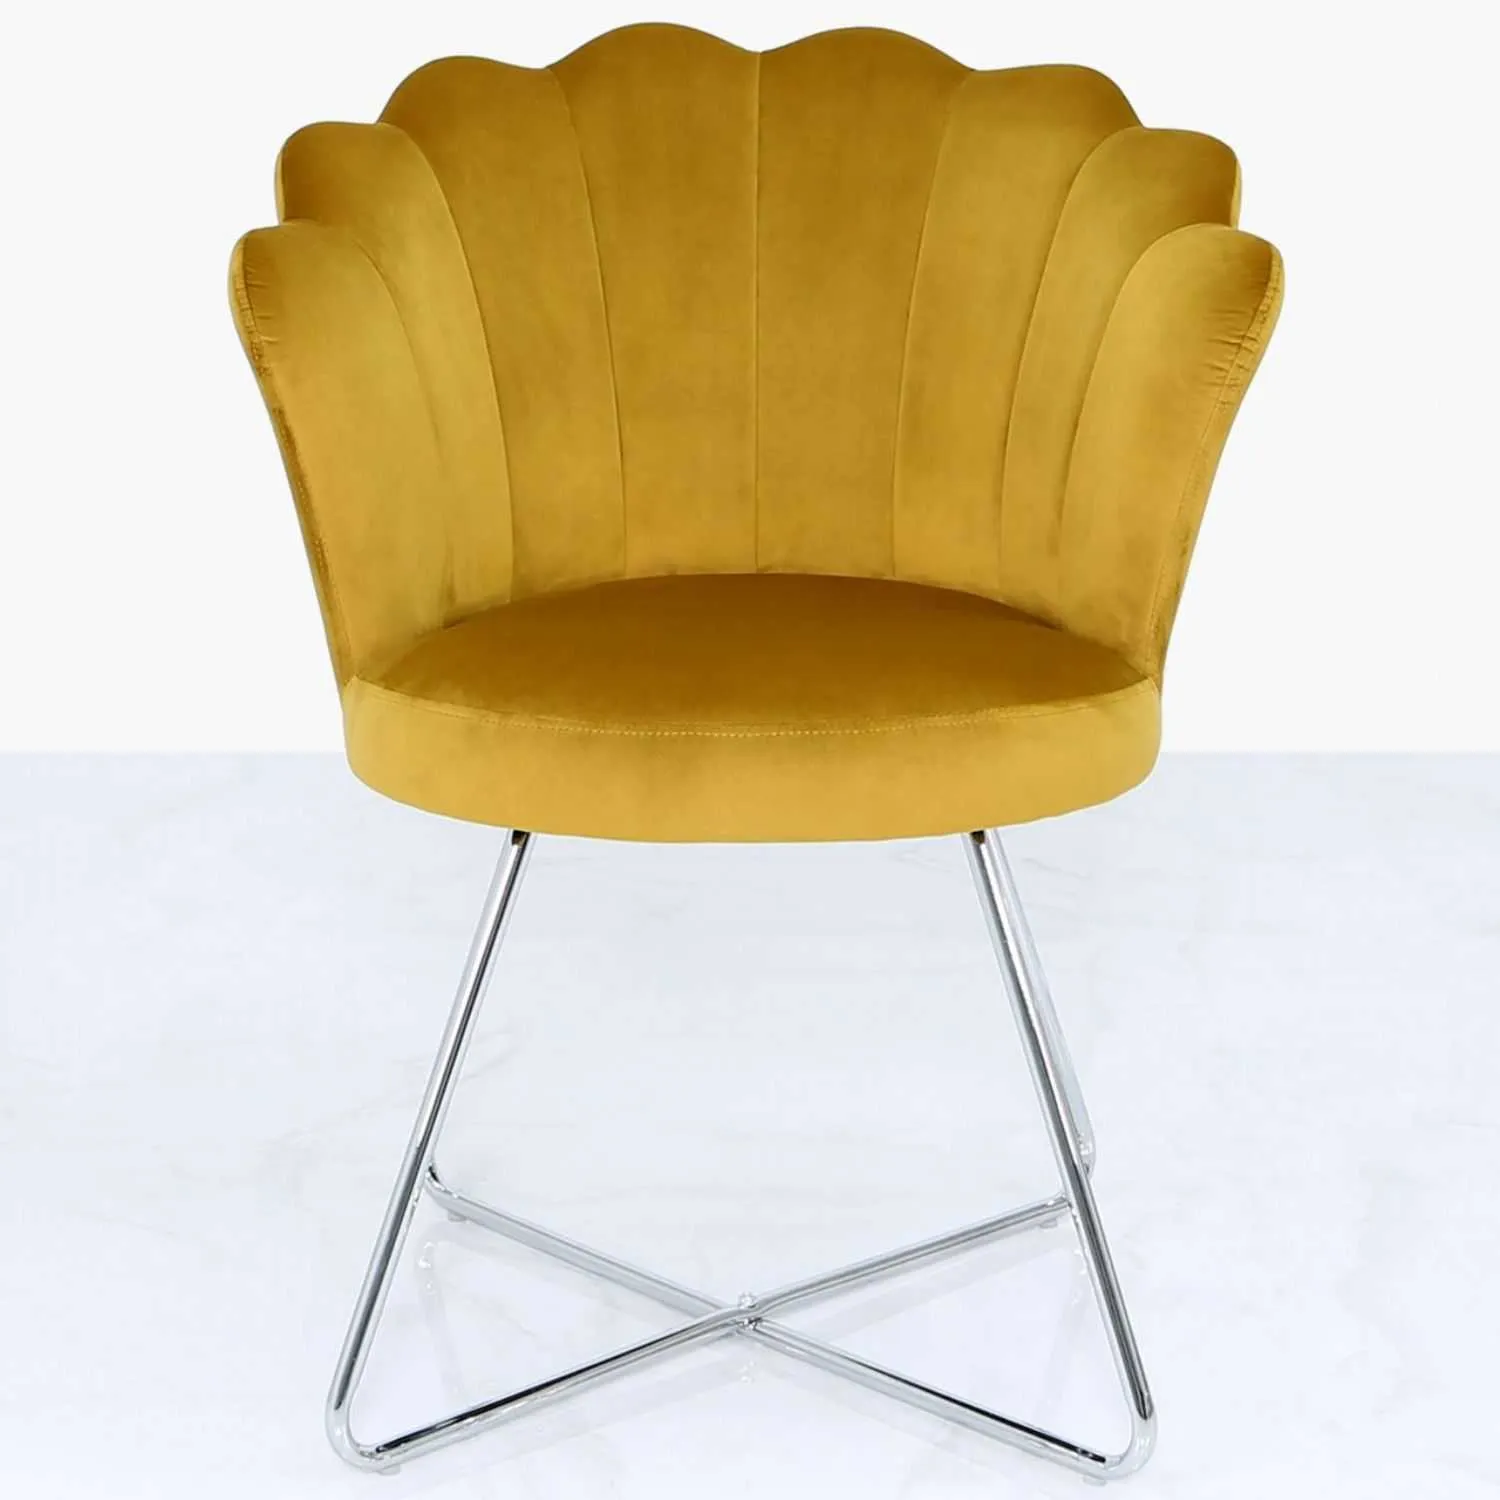 Ayla Shell Shape Accent Chair Mustard